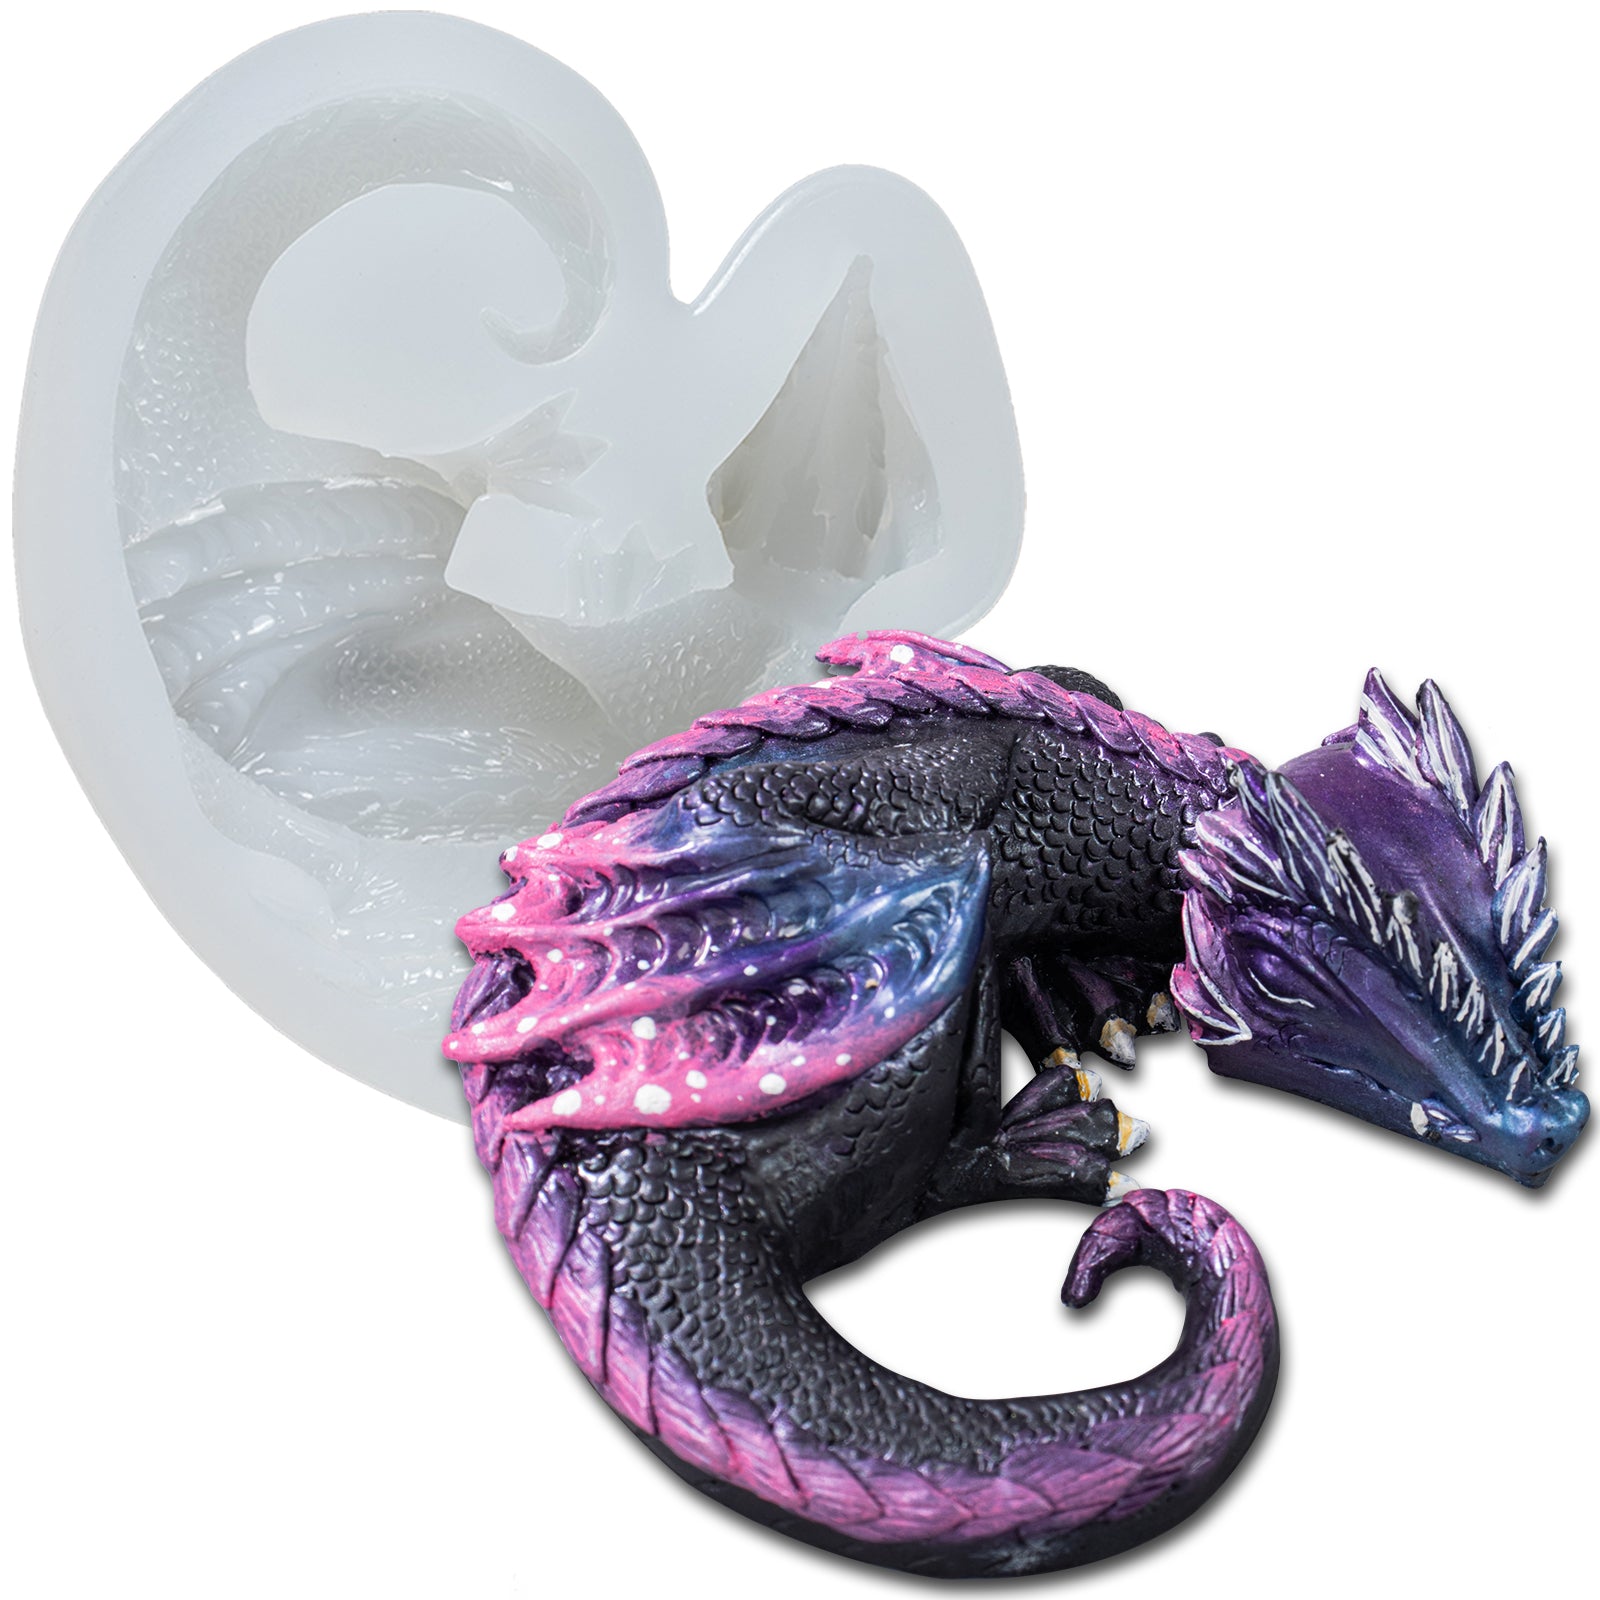 Baby Dragon Silicone Mold. 3d Dragon in Egg Soap Silicone Mold. Halloween  Mold for Craft. Hatching Dragon Mold. 